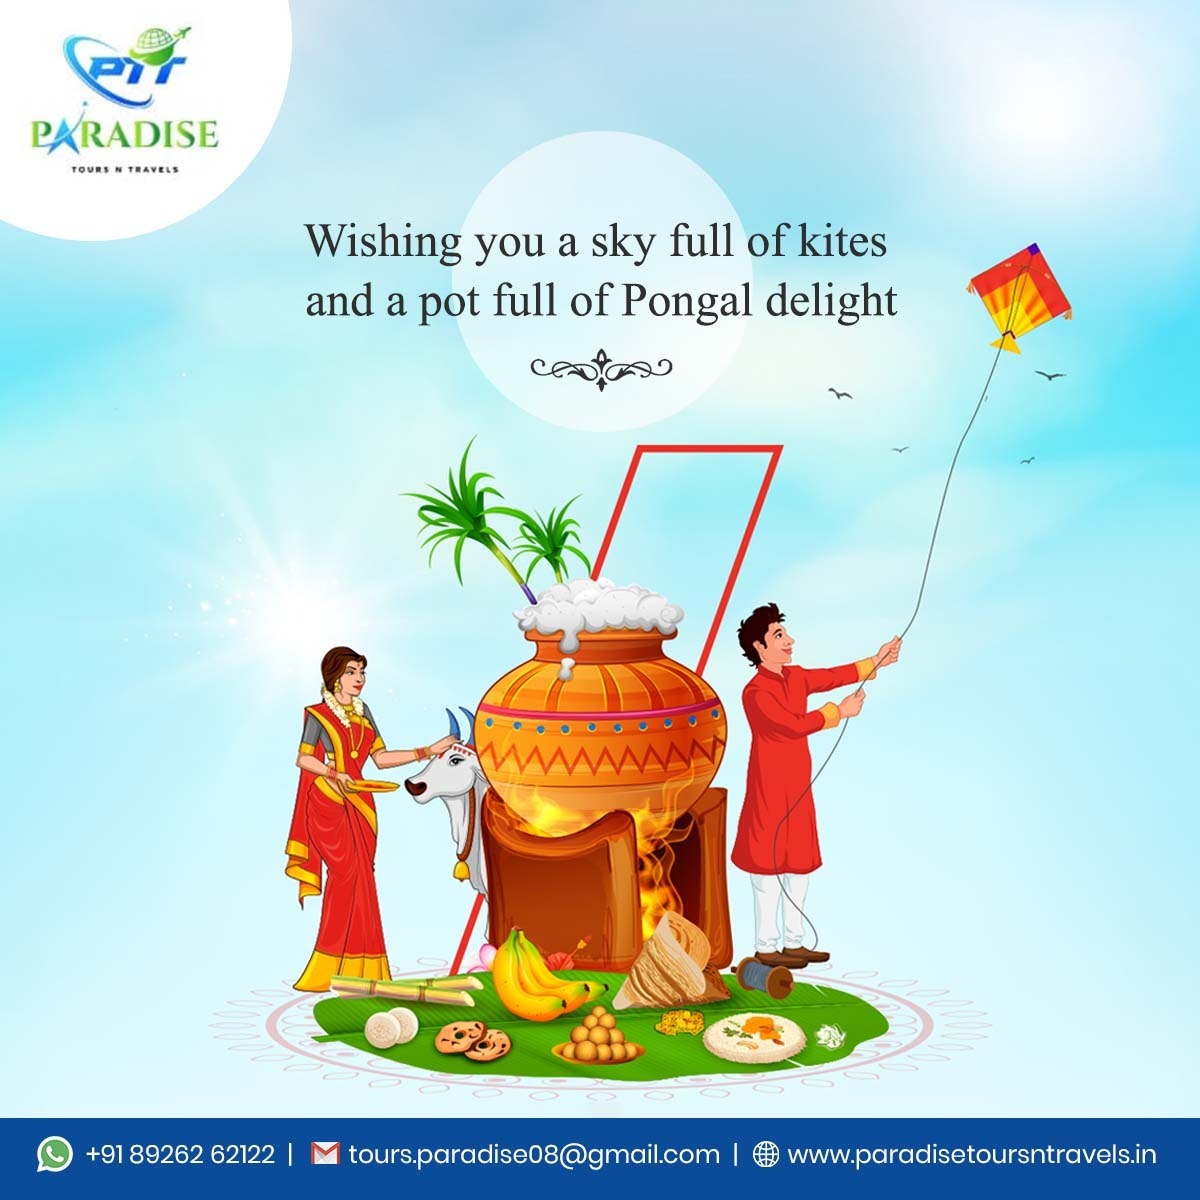 Let the warmth of the harvest fill your heart with happiness. Happy Makar Sankranti and Pongal.

#Paradise #SankrantiSkies #PongalFeast #FestiveCanvas #HarvestJoy #SankrantiSmiles #PongalFlavors #FeastofJoy #SankrantiCelebration #HarvestSymphony #PongalJoy #FestivalVibes